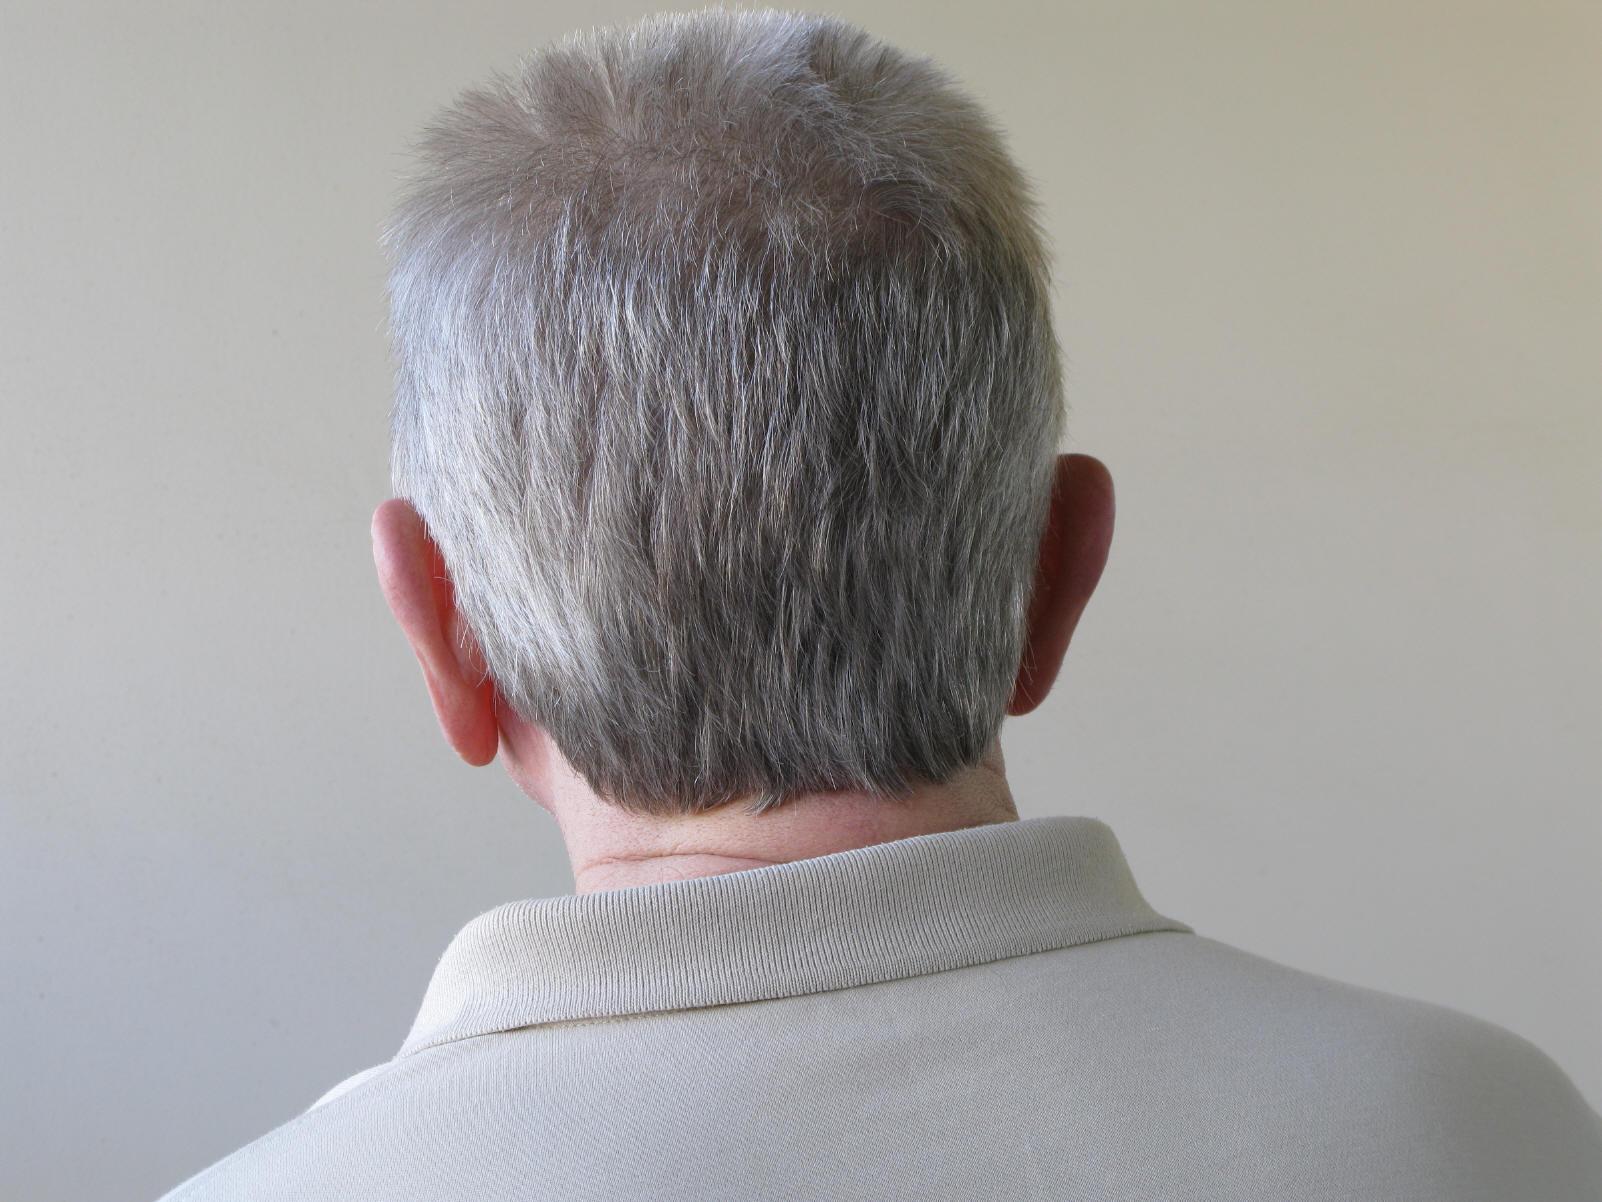 New cancer drug leaves scientists confused after turning patients' grey hair  dark again | The Independent | The Independent